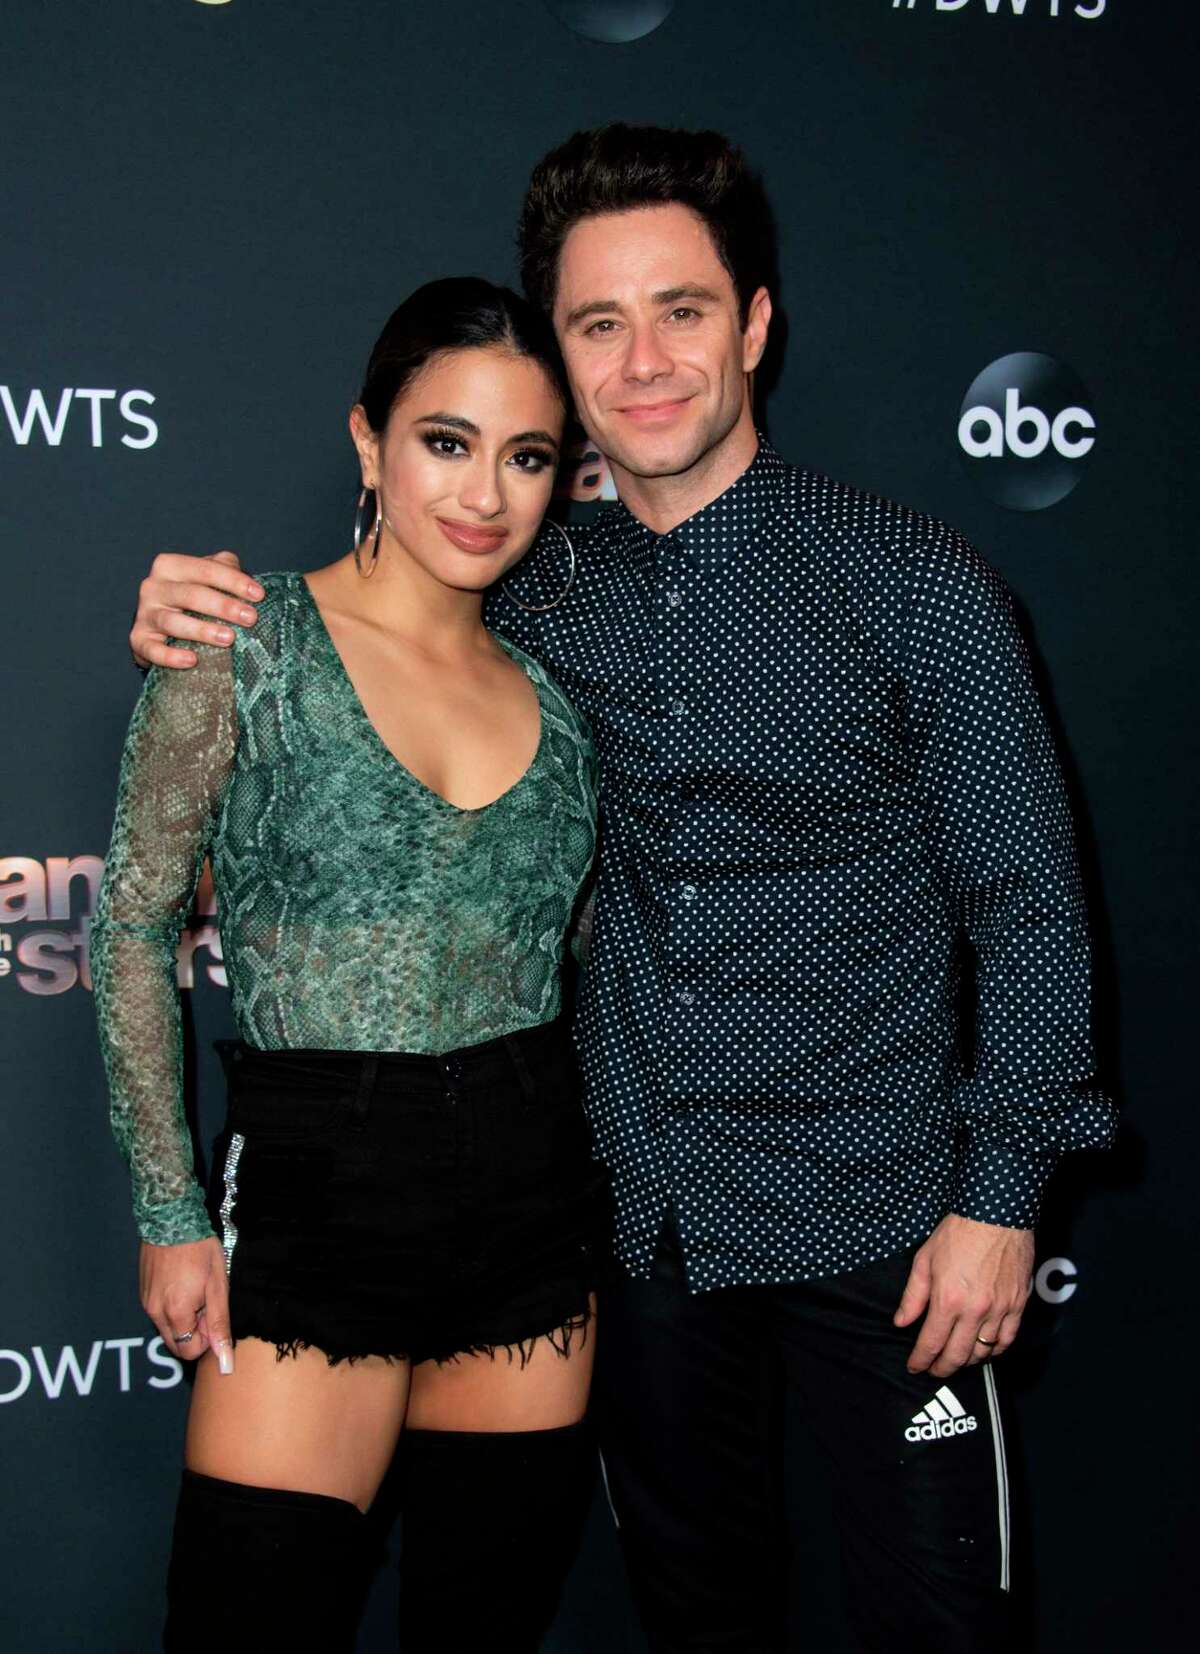 US singer Ally Brooke (L) and Australian professional dancer Sasha Farber attend the Dancing With The Stars - 2019 top 6 finalist event, November 4, 2019, in Los Angeles. (Photo by VALERIE MACON / AFP) (Photo by VALERIE MACON/AFP via Getty Images)